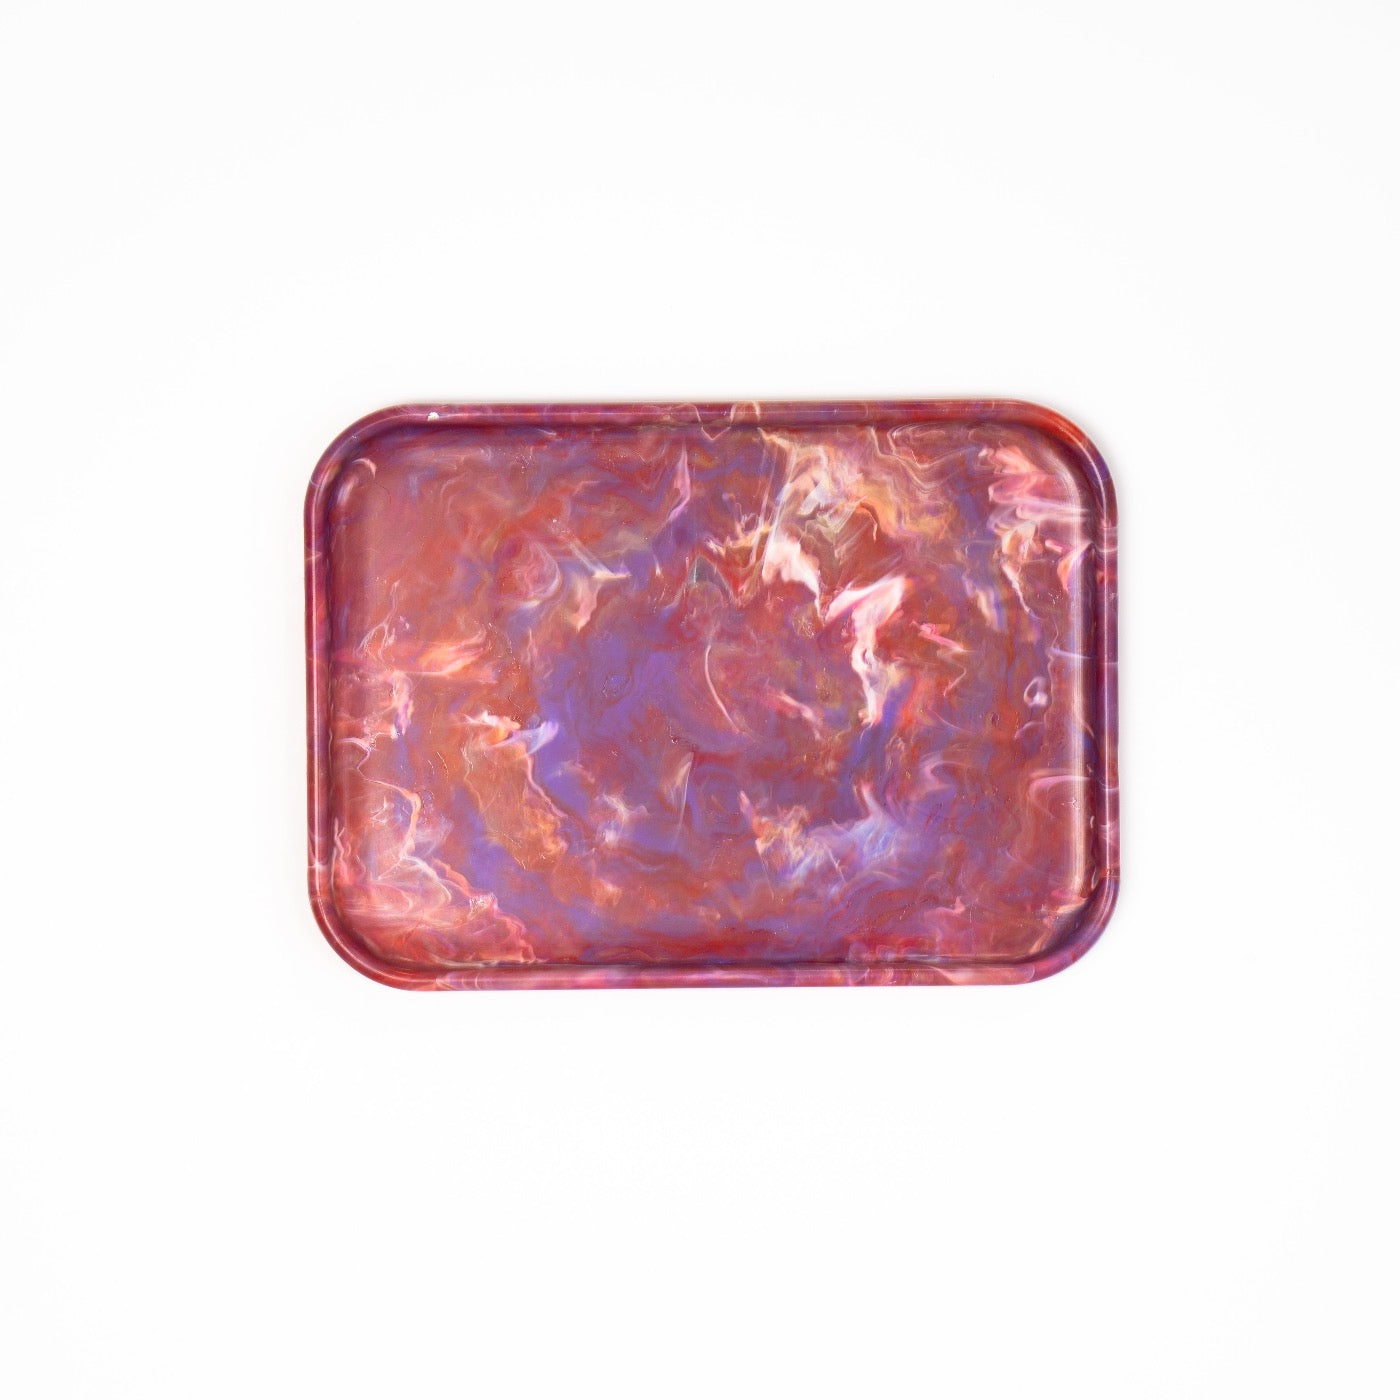 Recycled tray by yod and co in pink